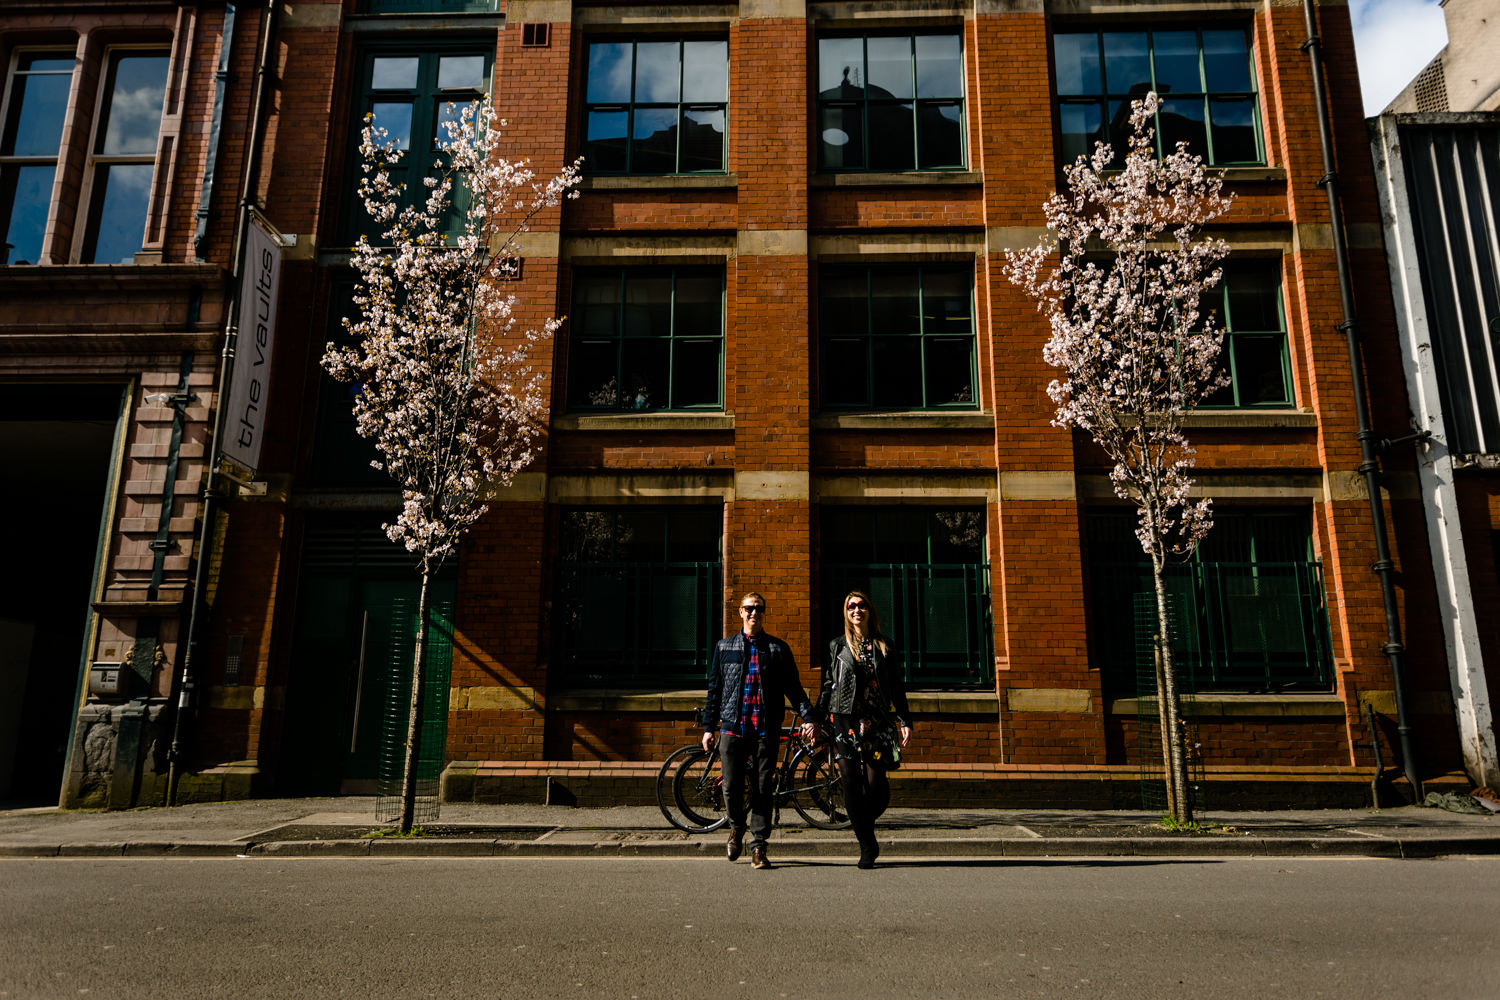 A couple cross the street in the Northern Quart of Manchester between some blossom trees. 